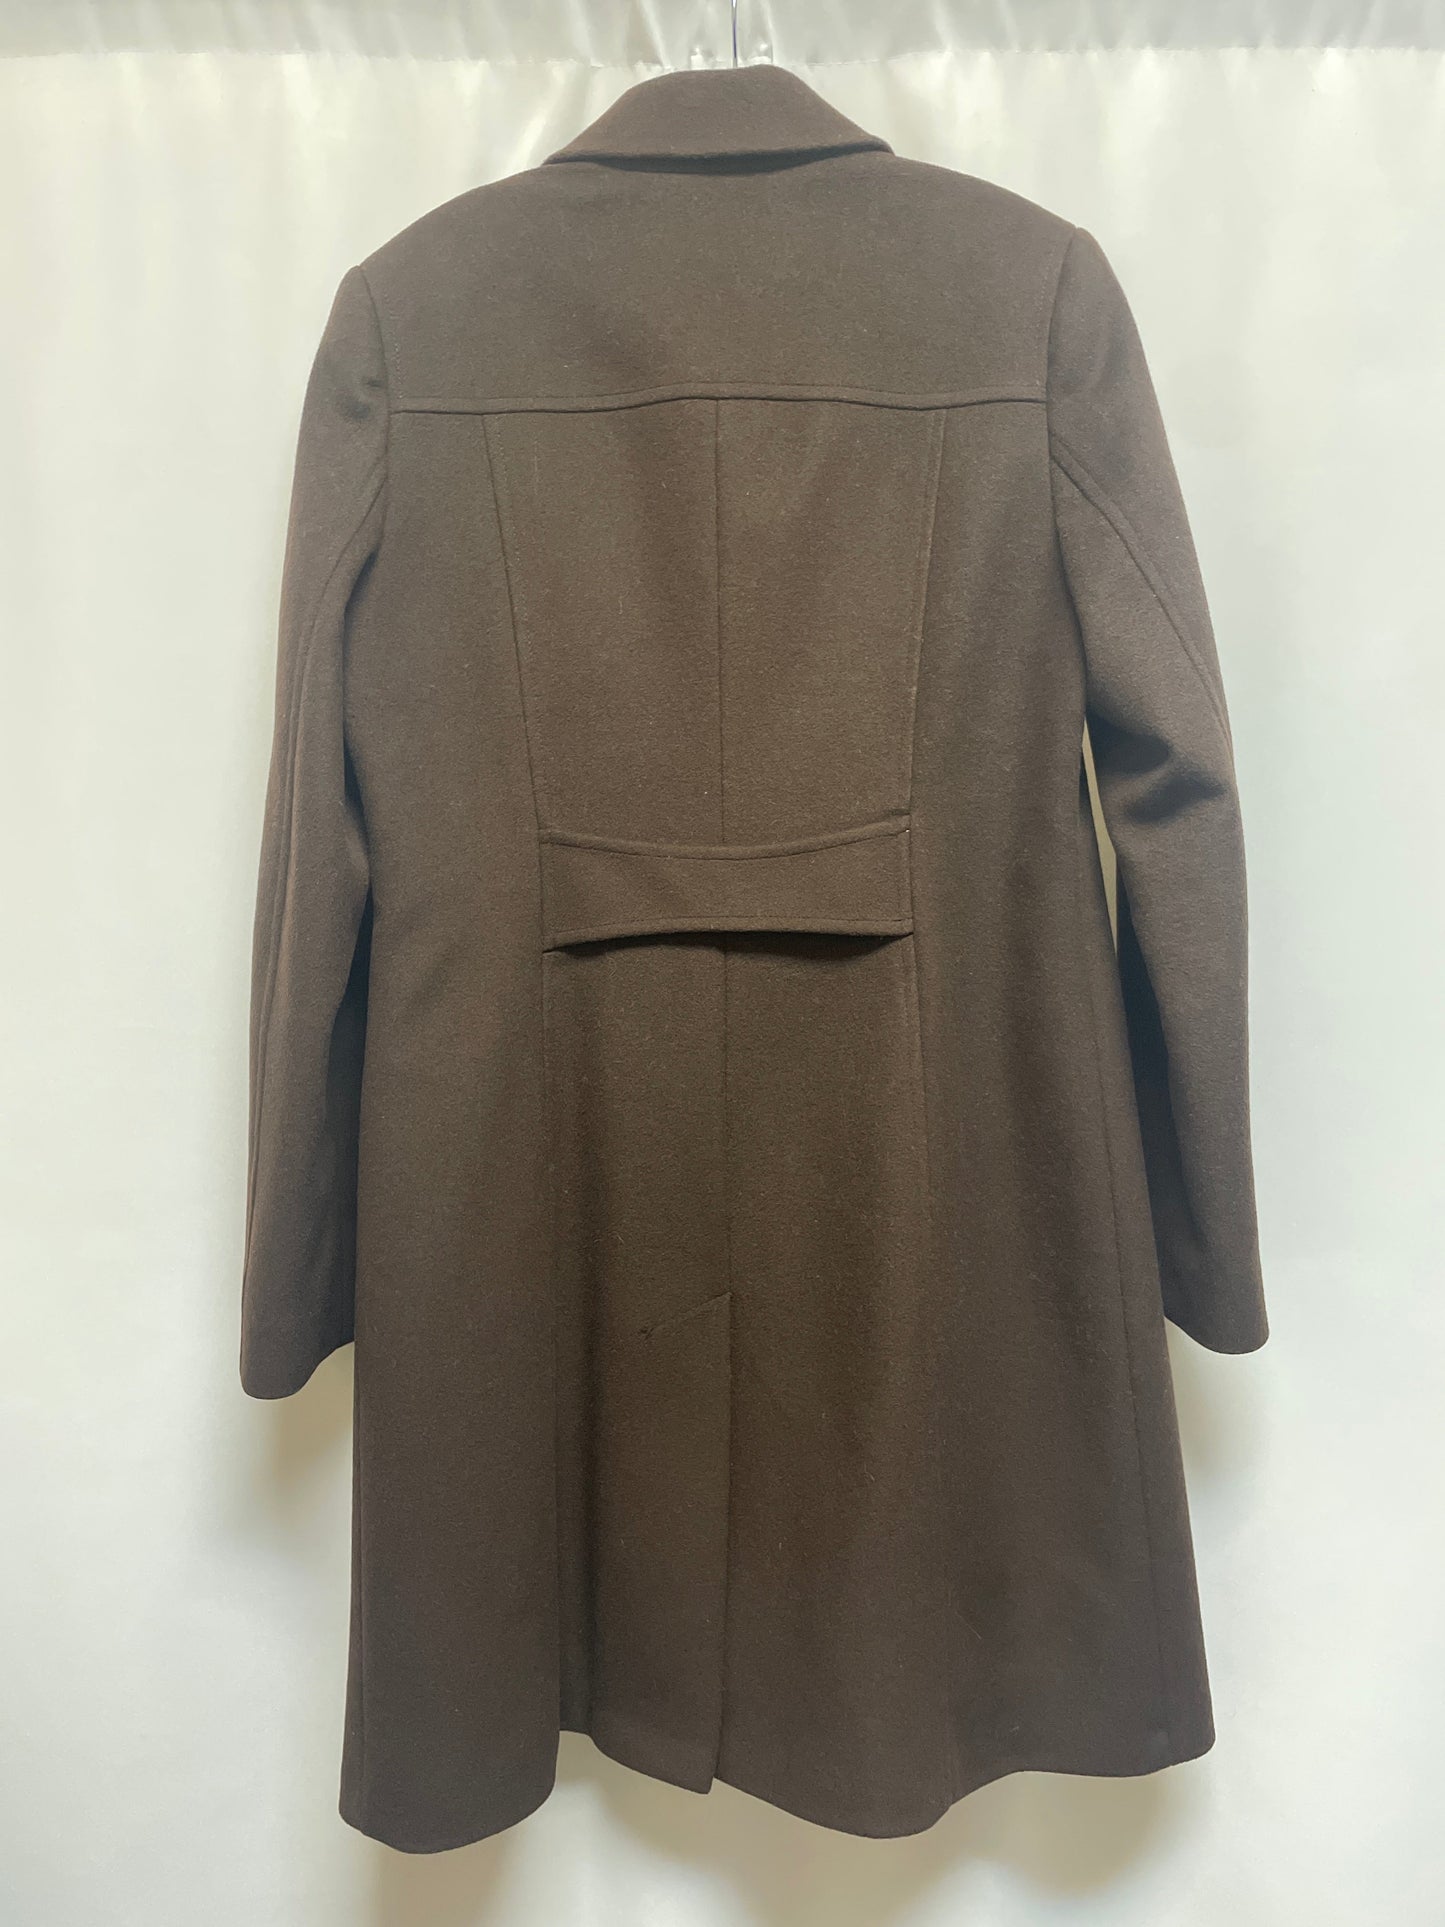 Coat Other By Via Spiga  Size: L